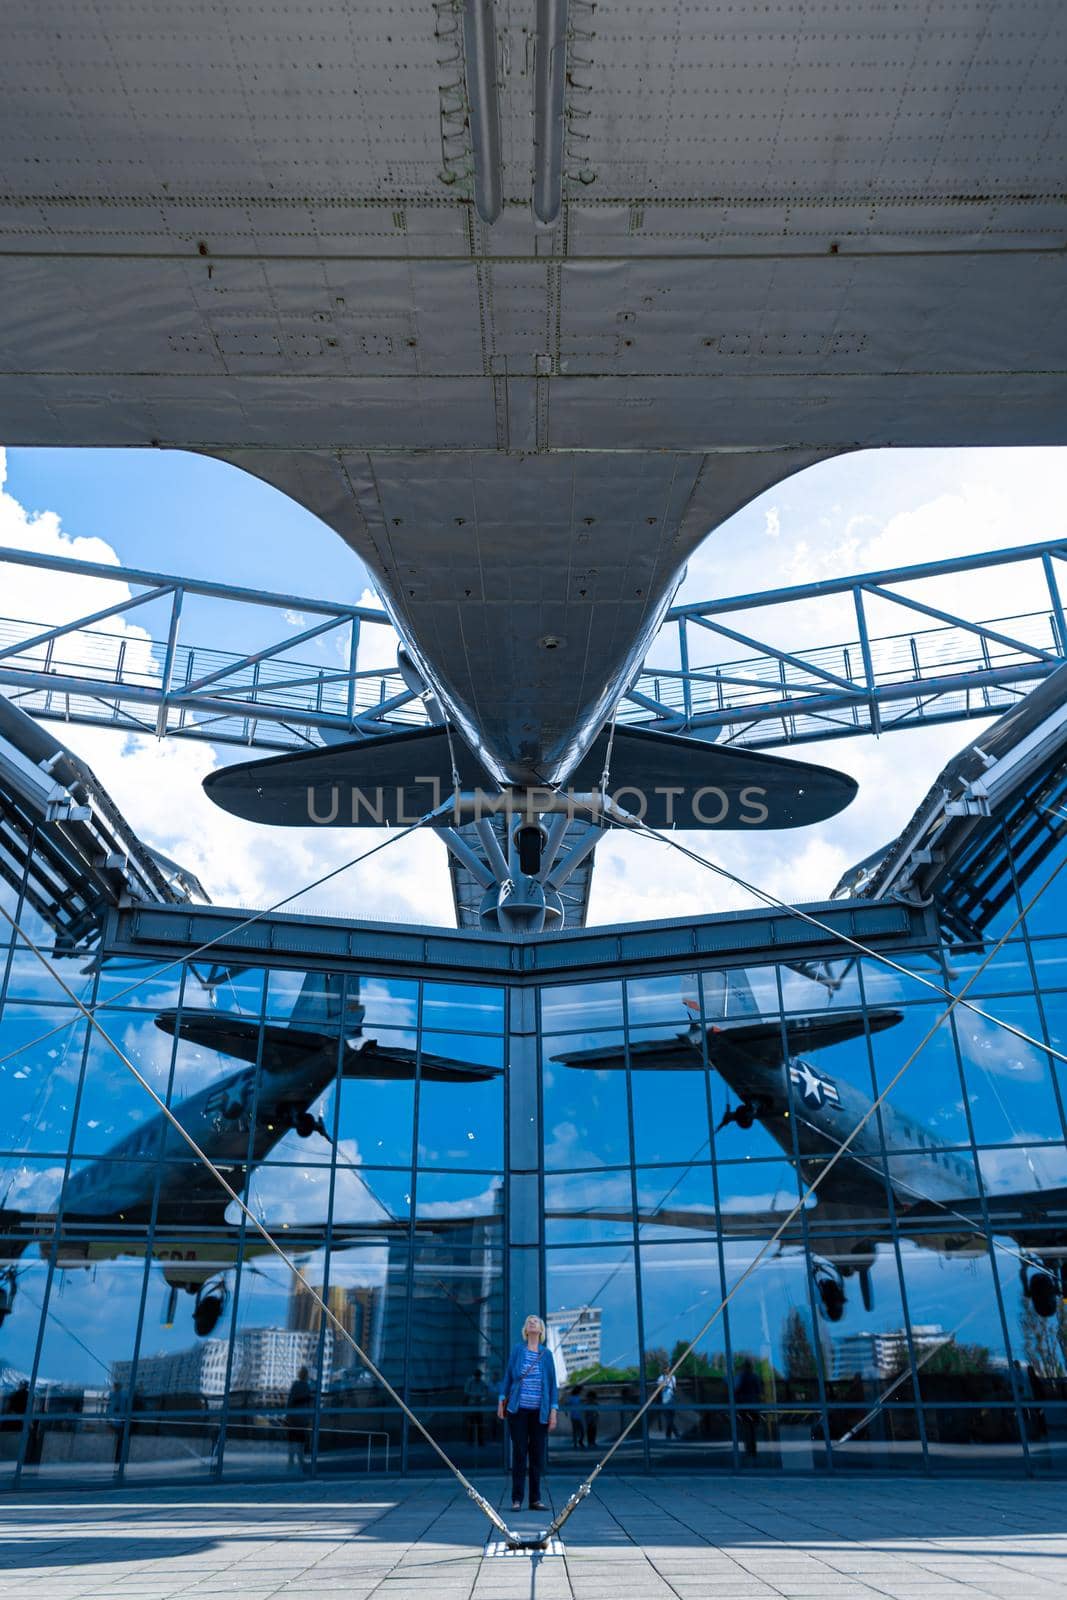 The plane is suspended from the facade of the building of the Aircraft Museum in Berlin by Try_my_best